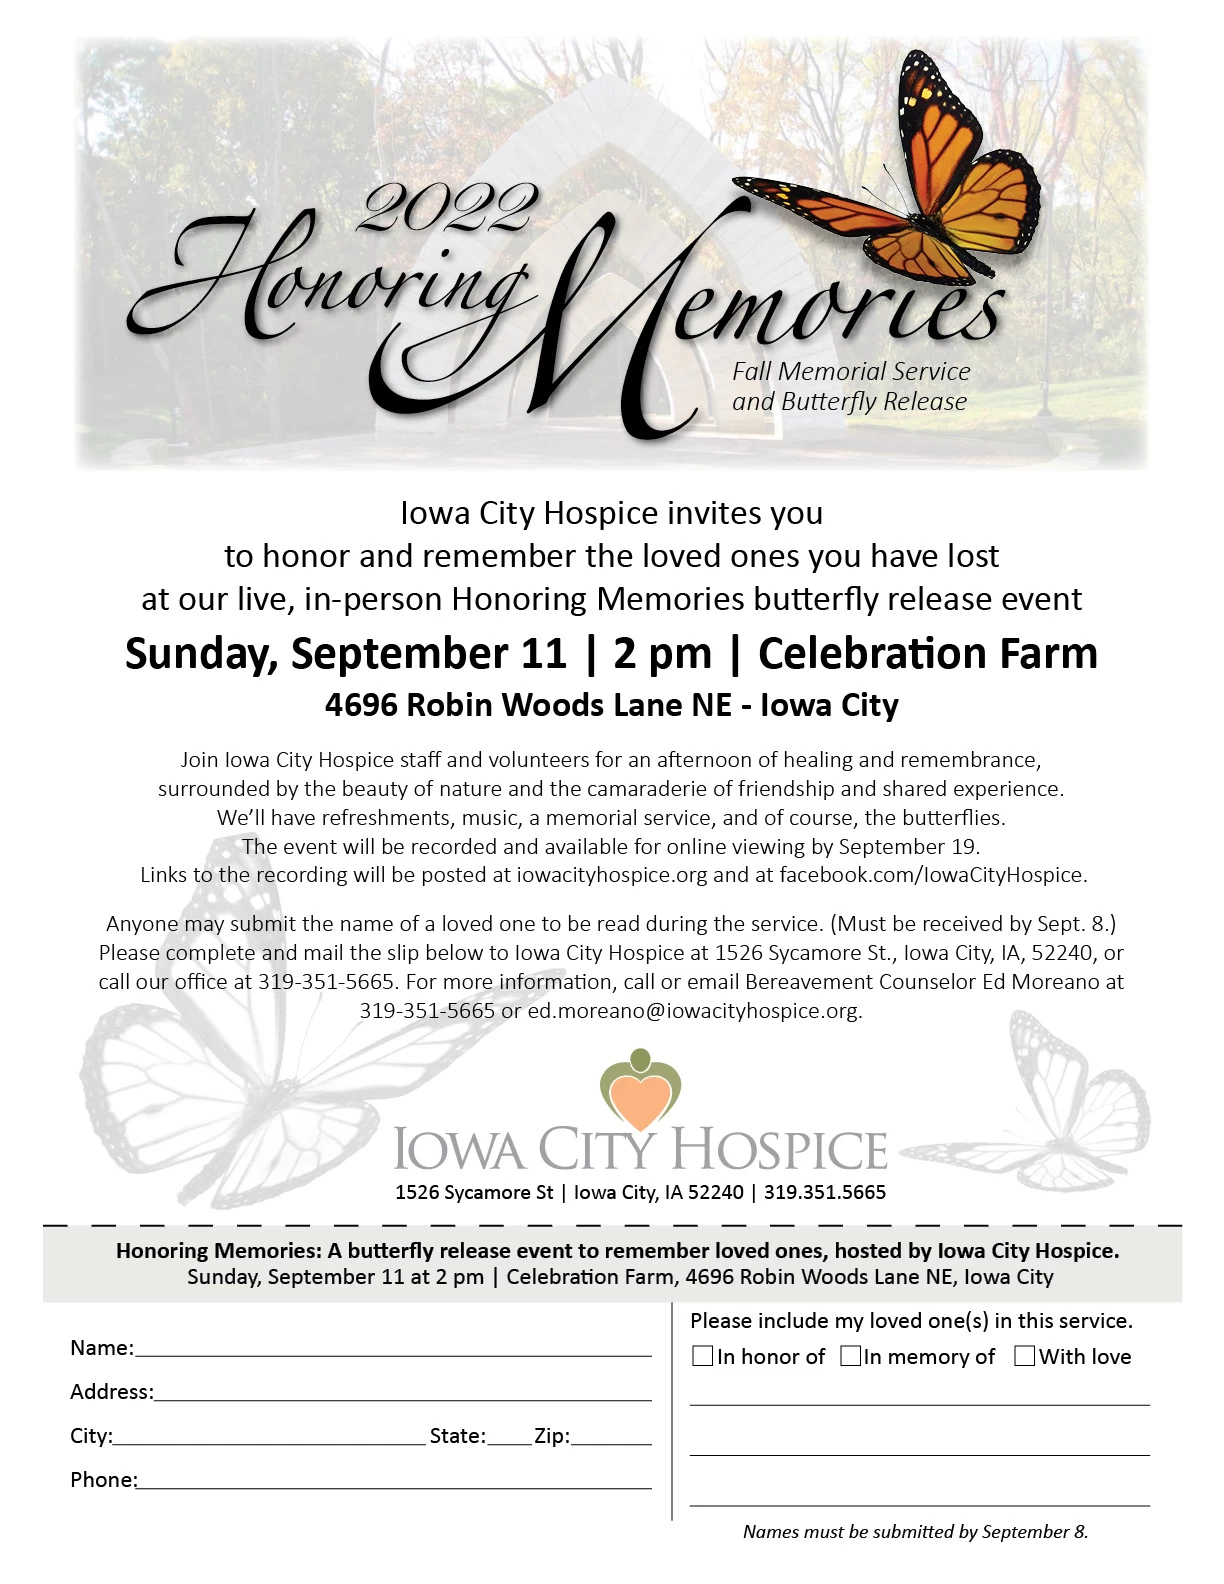 Honoring Memories, Fall Memorial Service and Butterfly Release